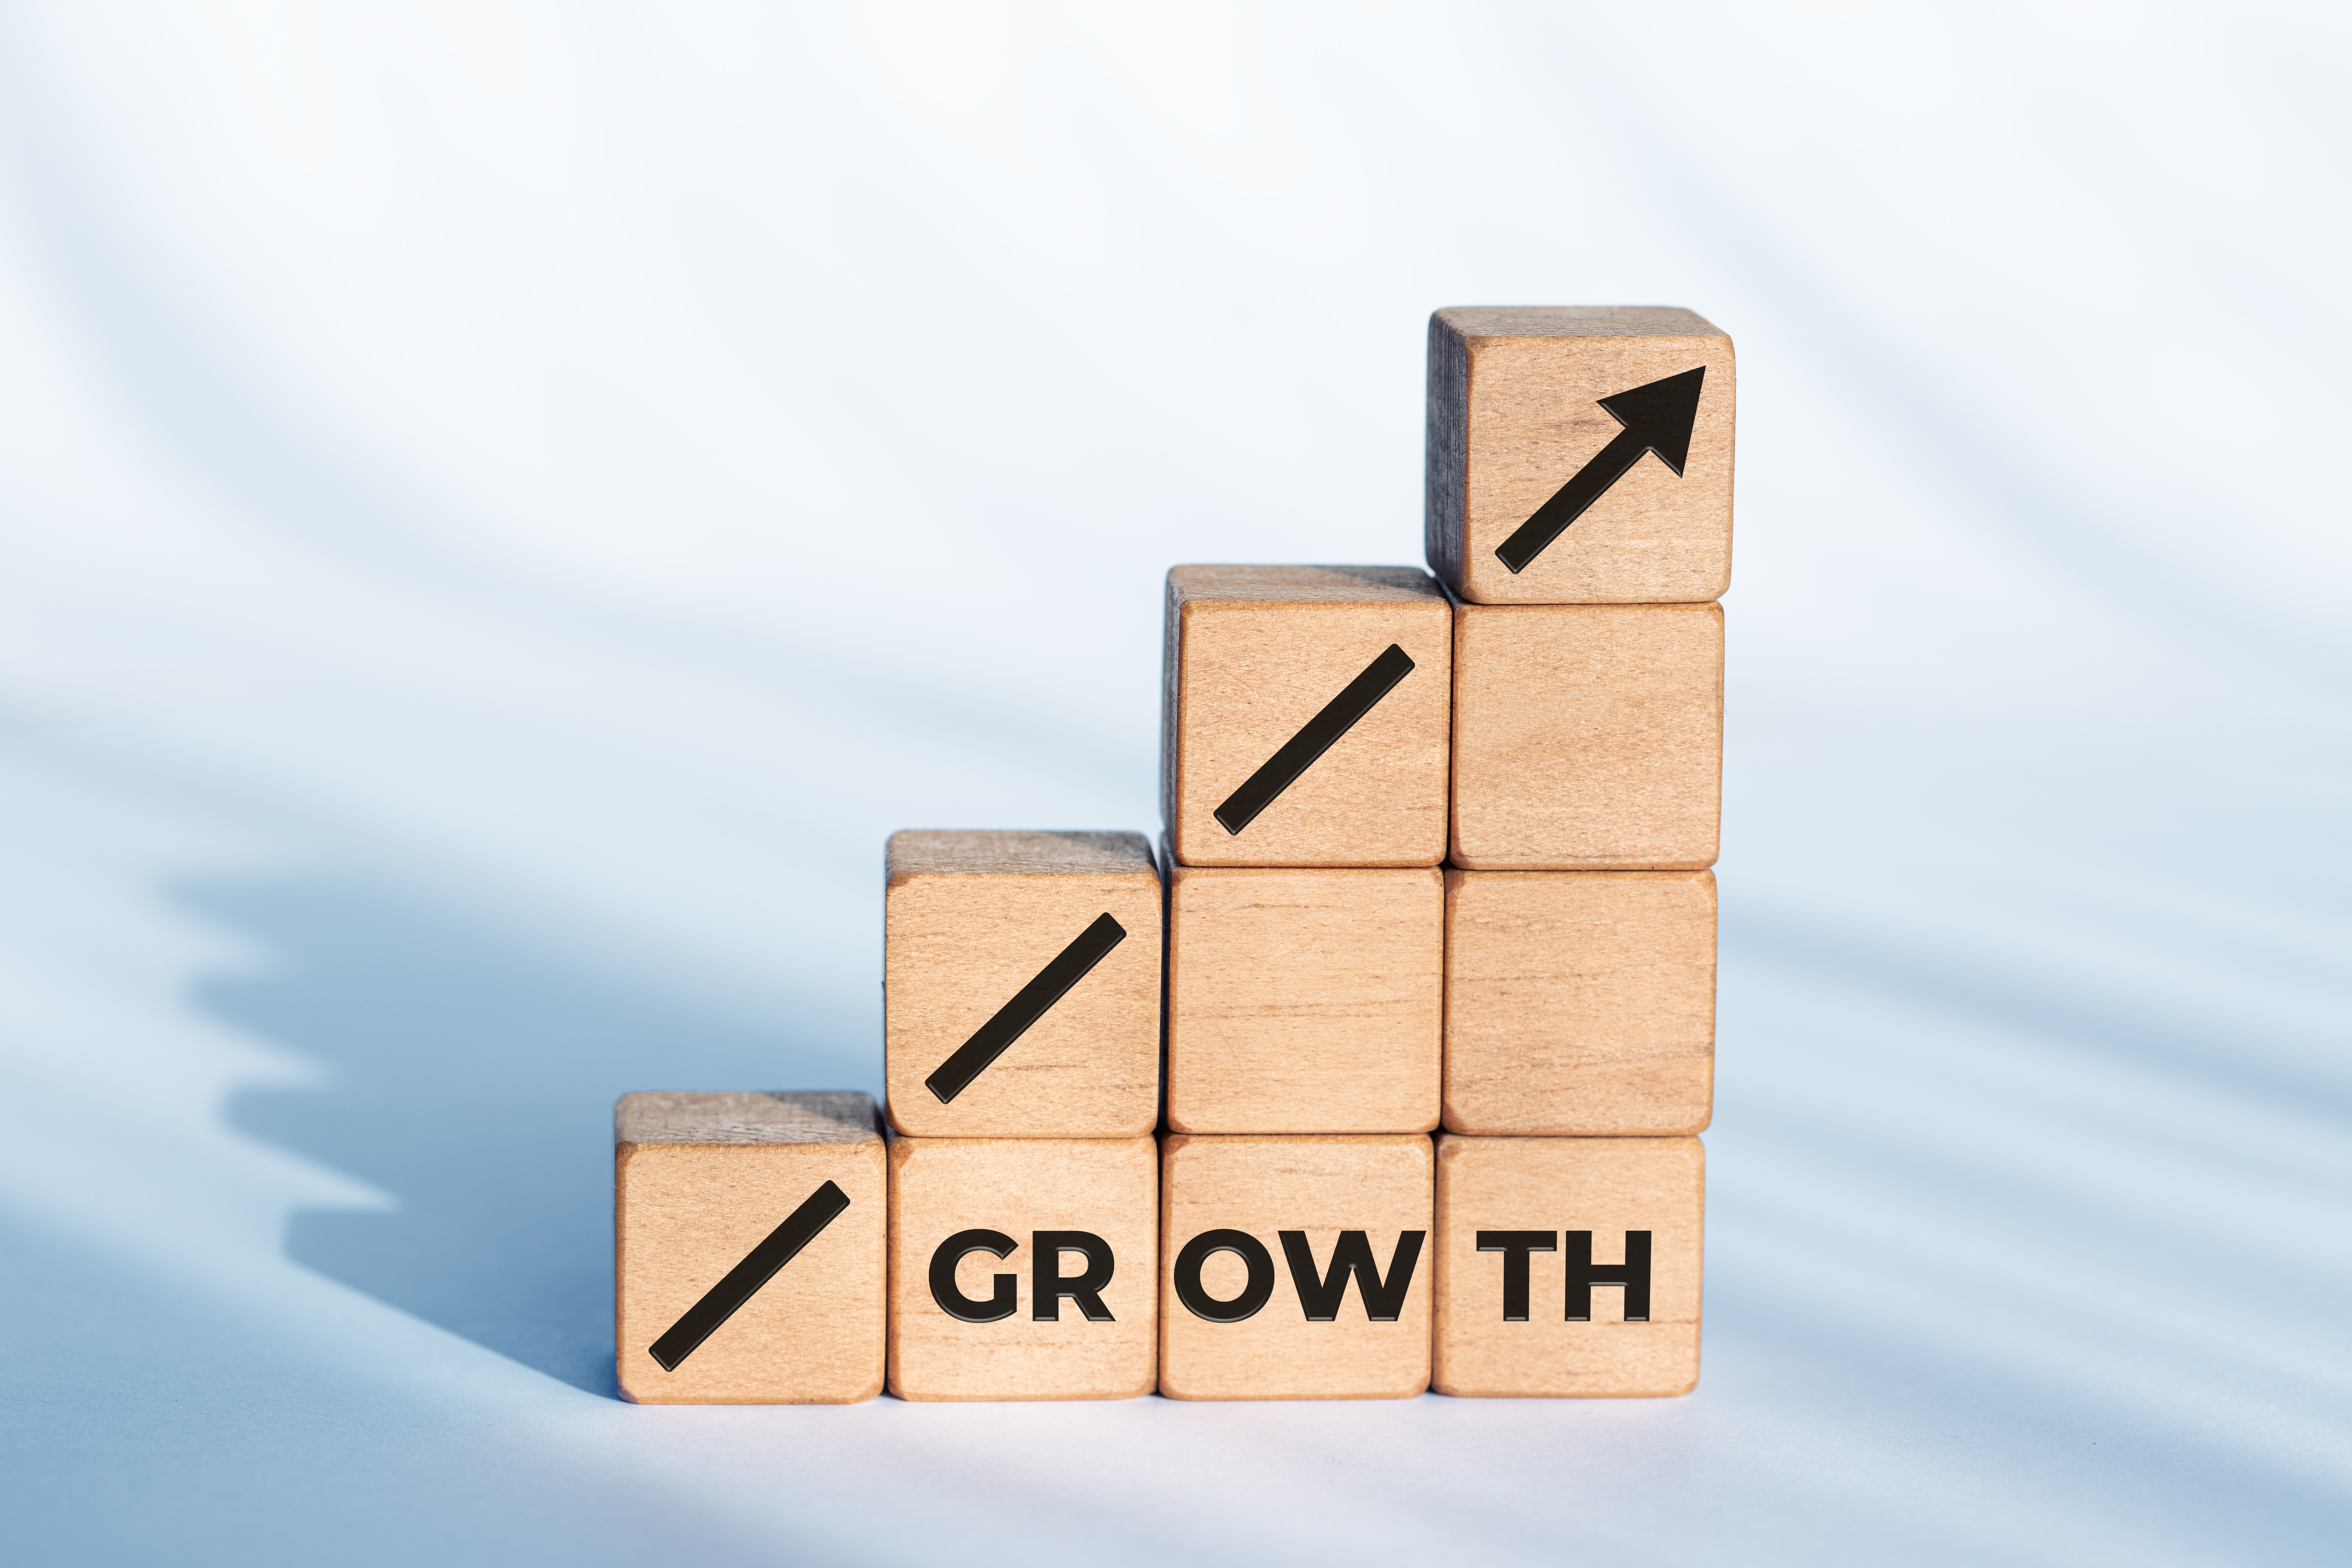 How to make your business grow